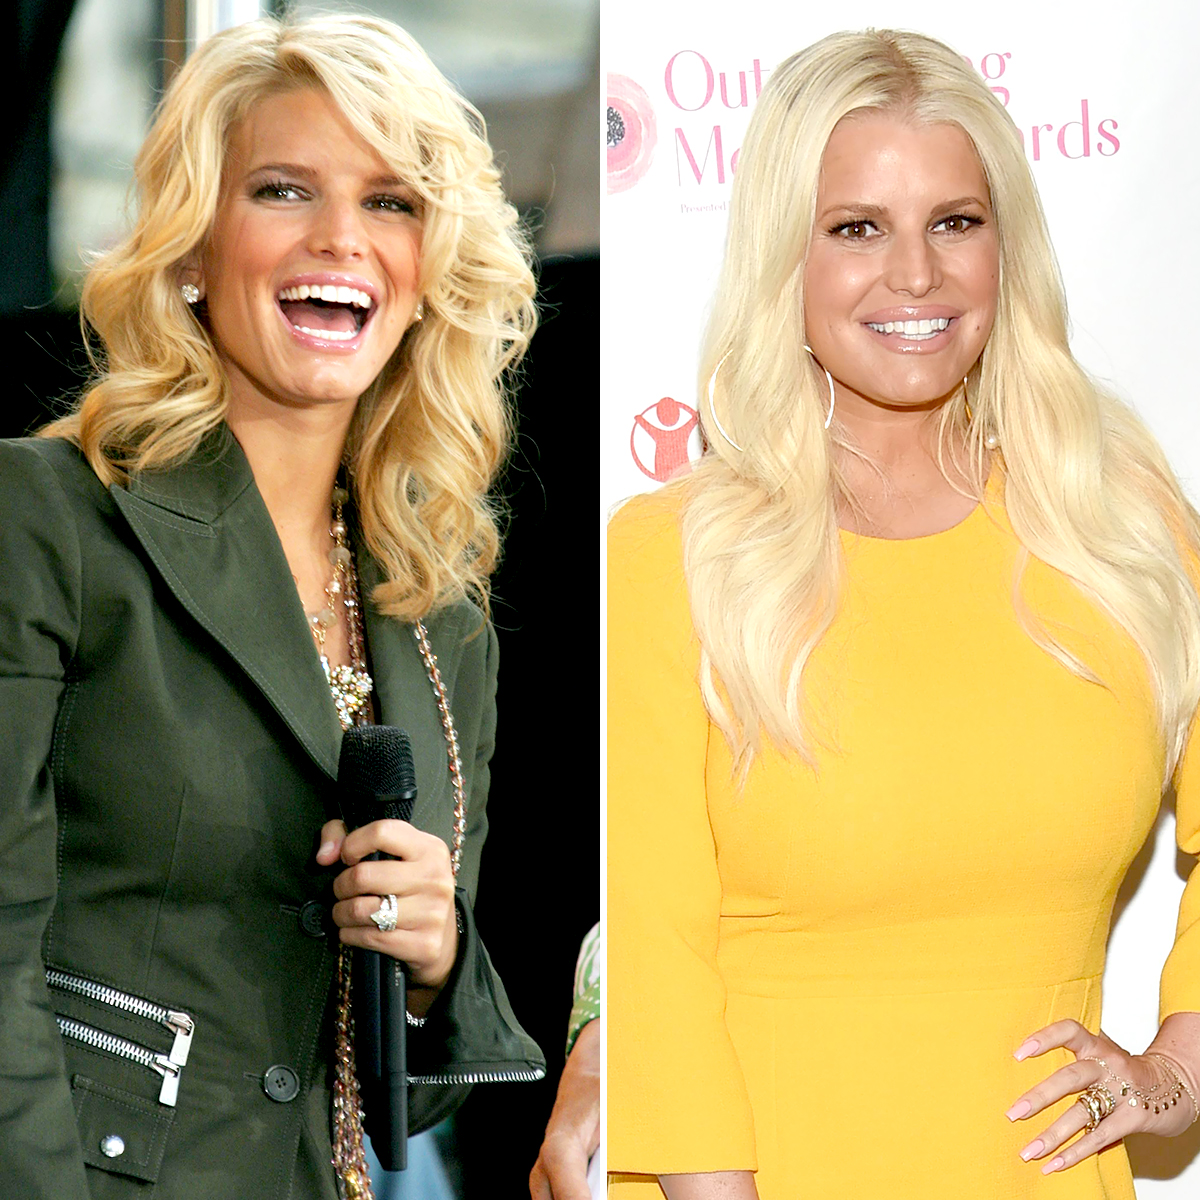 Jessica Simpson To Launch Maternity Line: 'You Want To Show Off